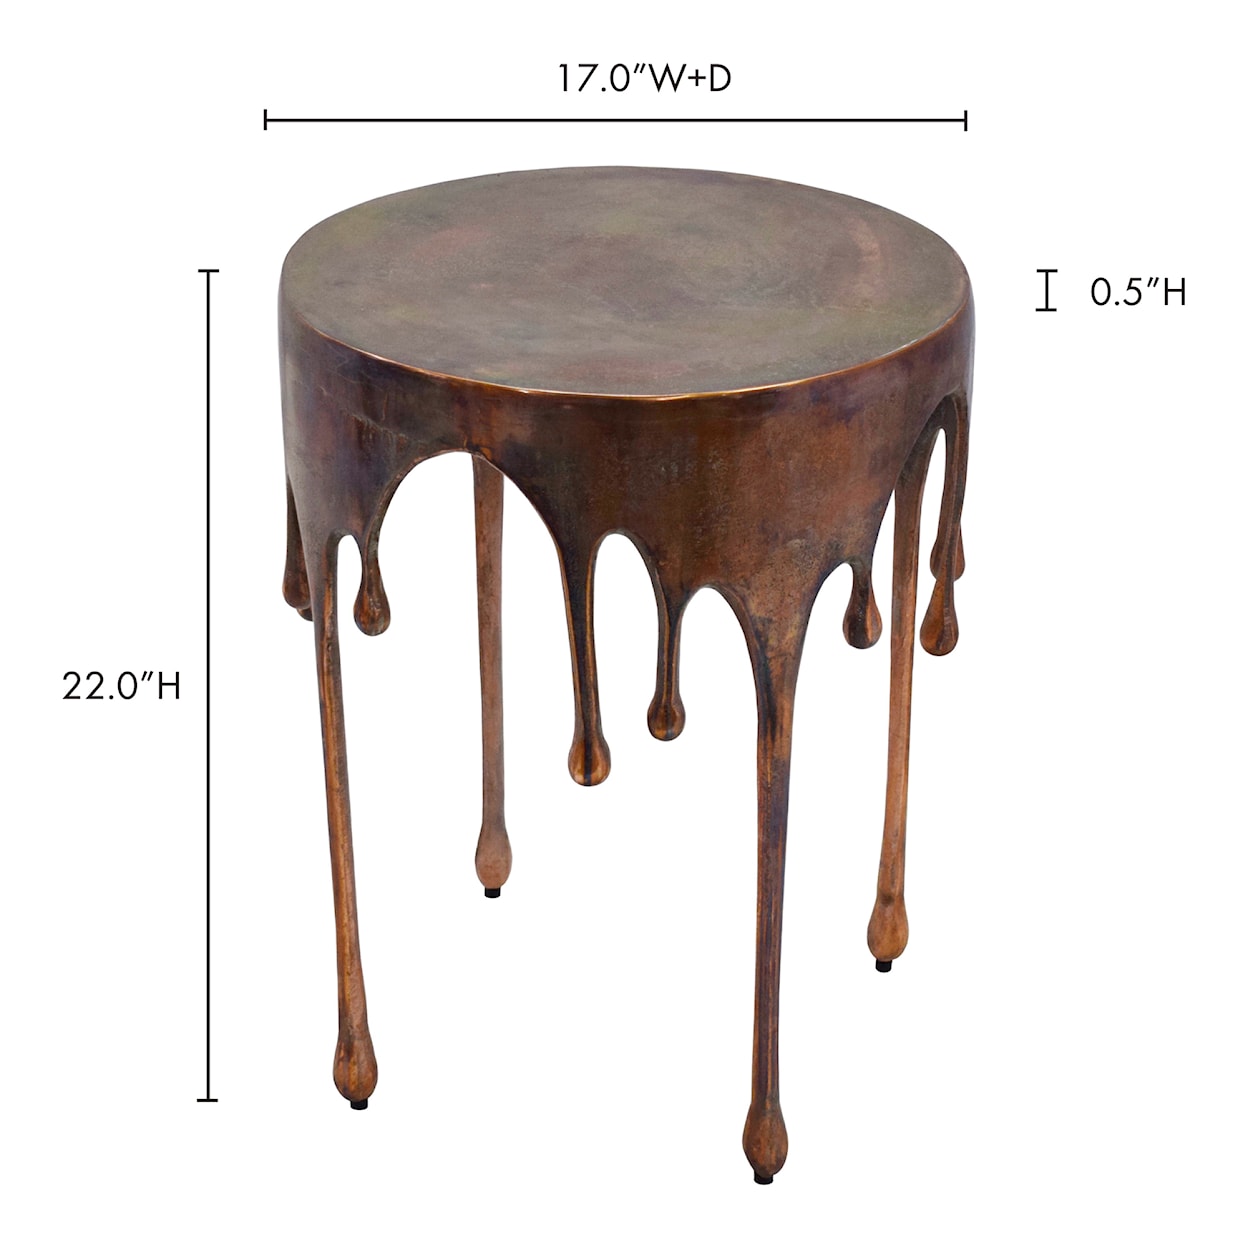 Moe's Home Collection Copperworks Copperworks Accent Table